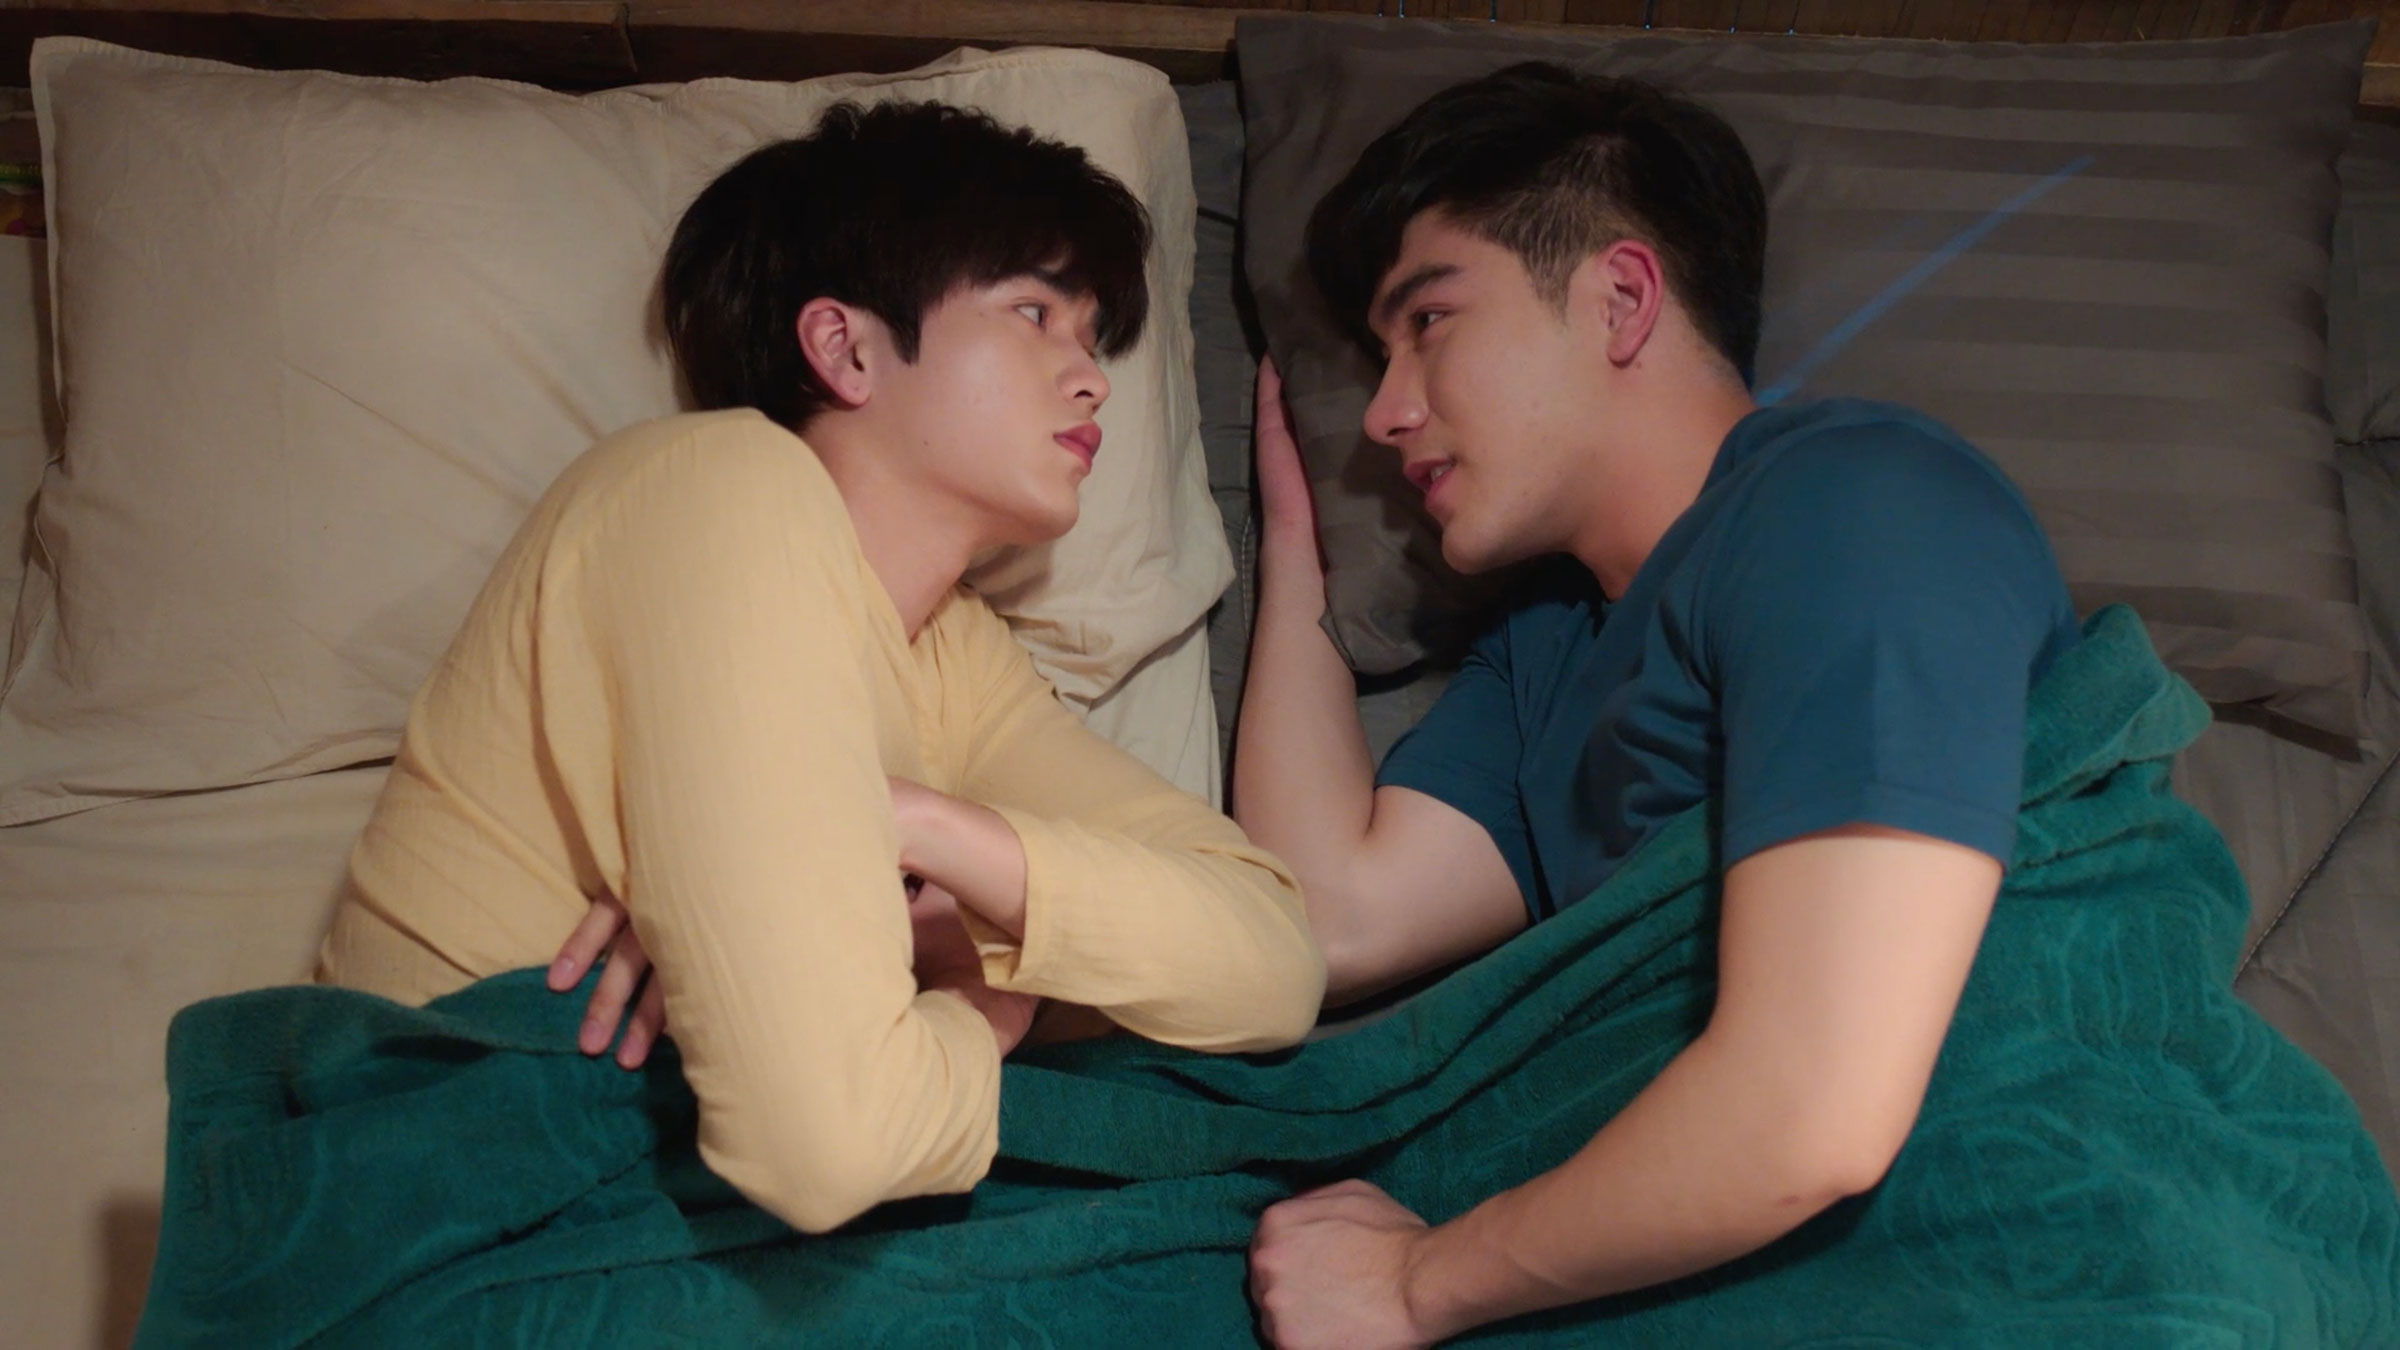 Thailand Force Sex - The Commercial Appeal of Thailand's BL Dramas | Time